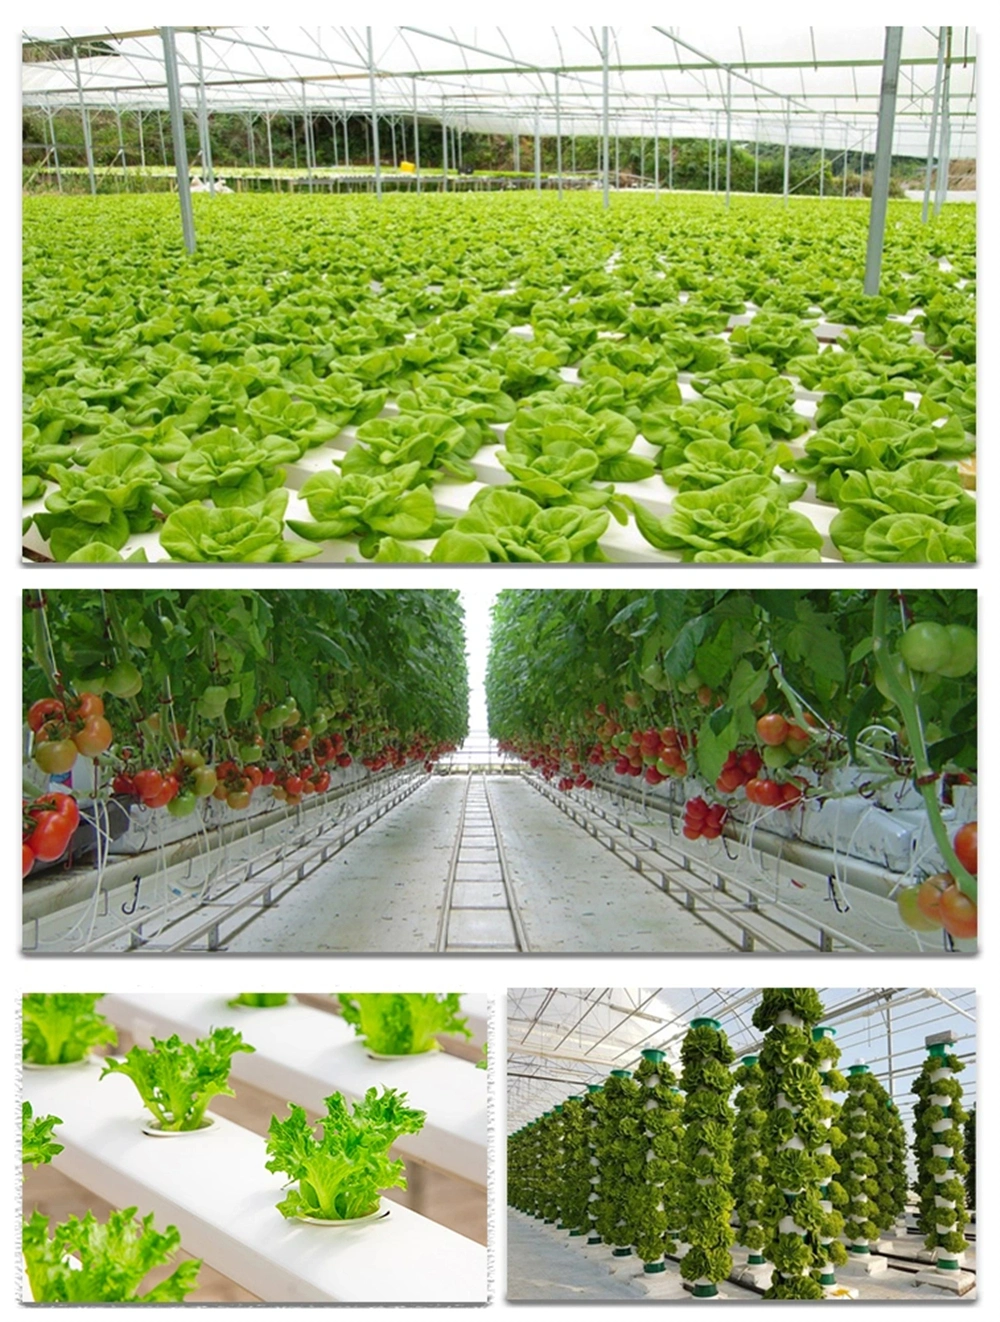 Commercial/Agricultural Tunnel/Arch Plastic Film Greenhouse Hydroponics for Vegetables/Cucumbers/Peppers/Lettuces/Flowers/Tomato